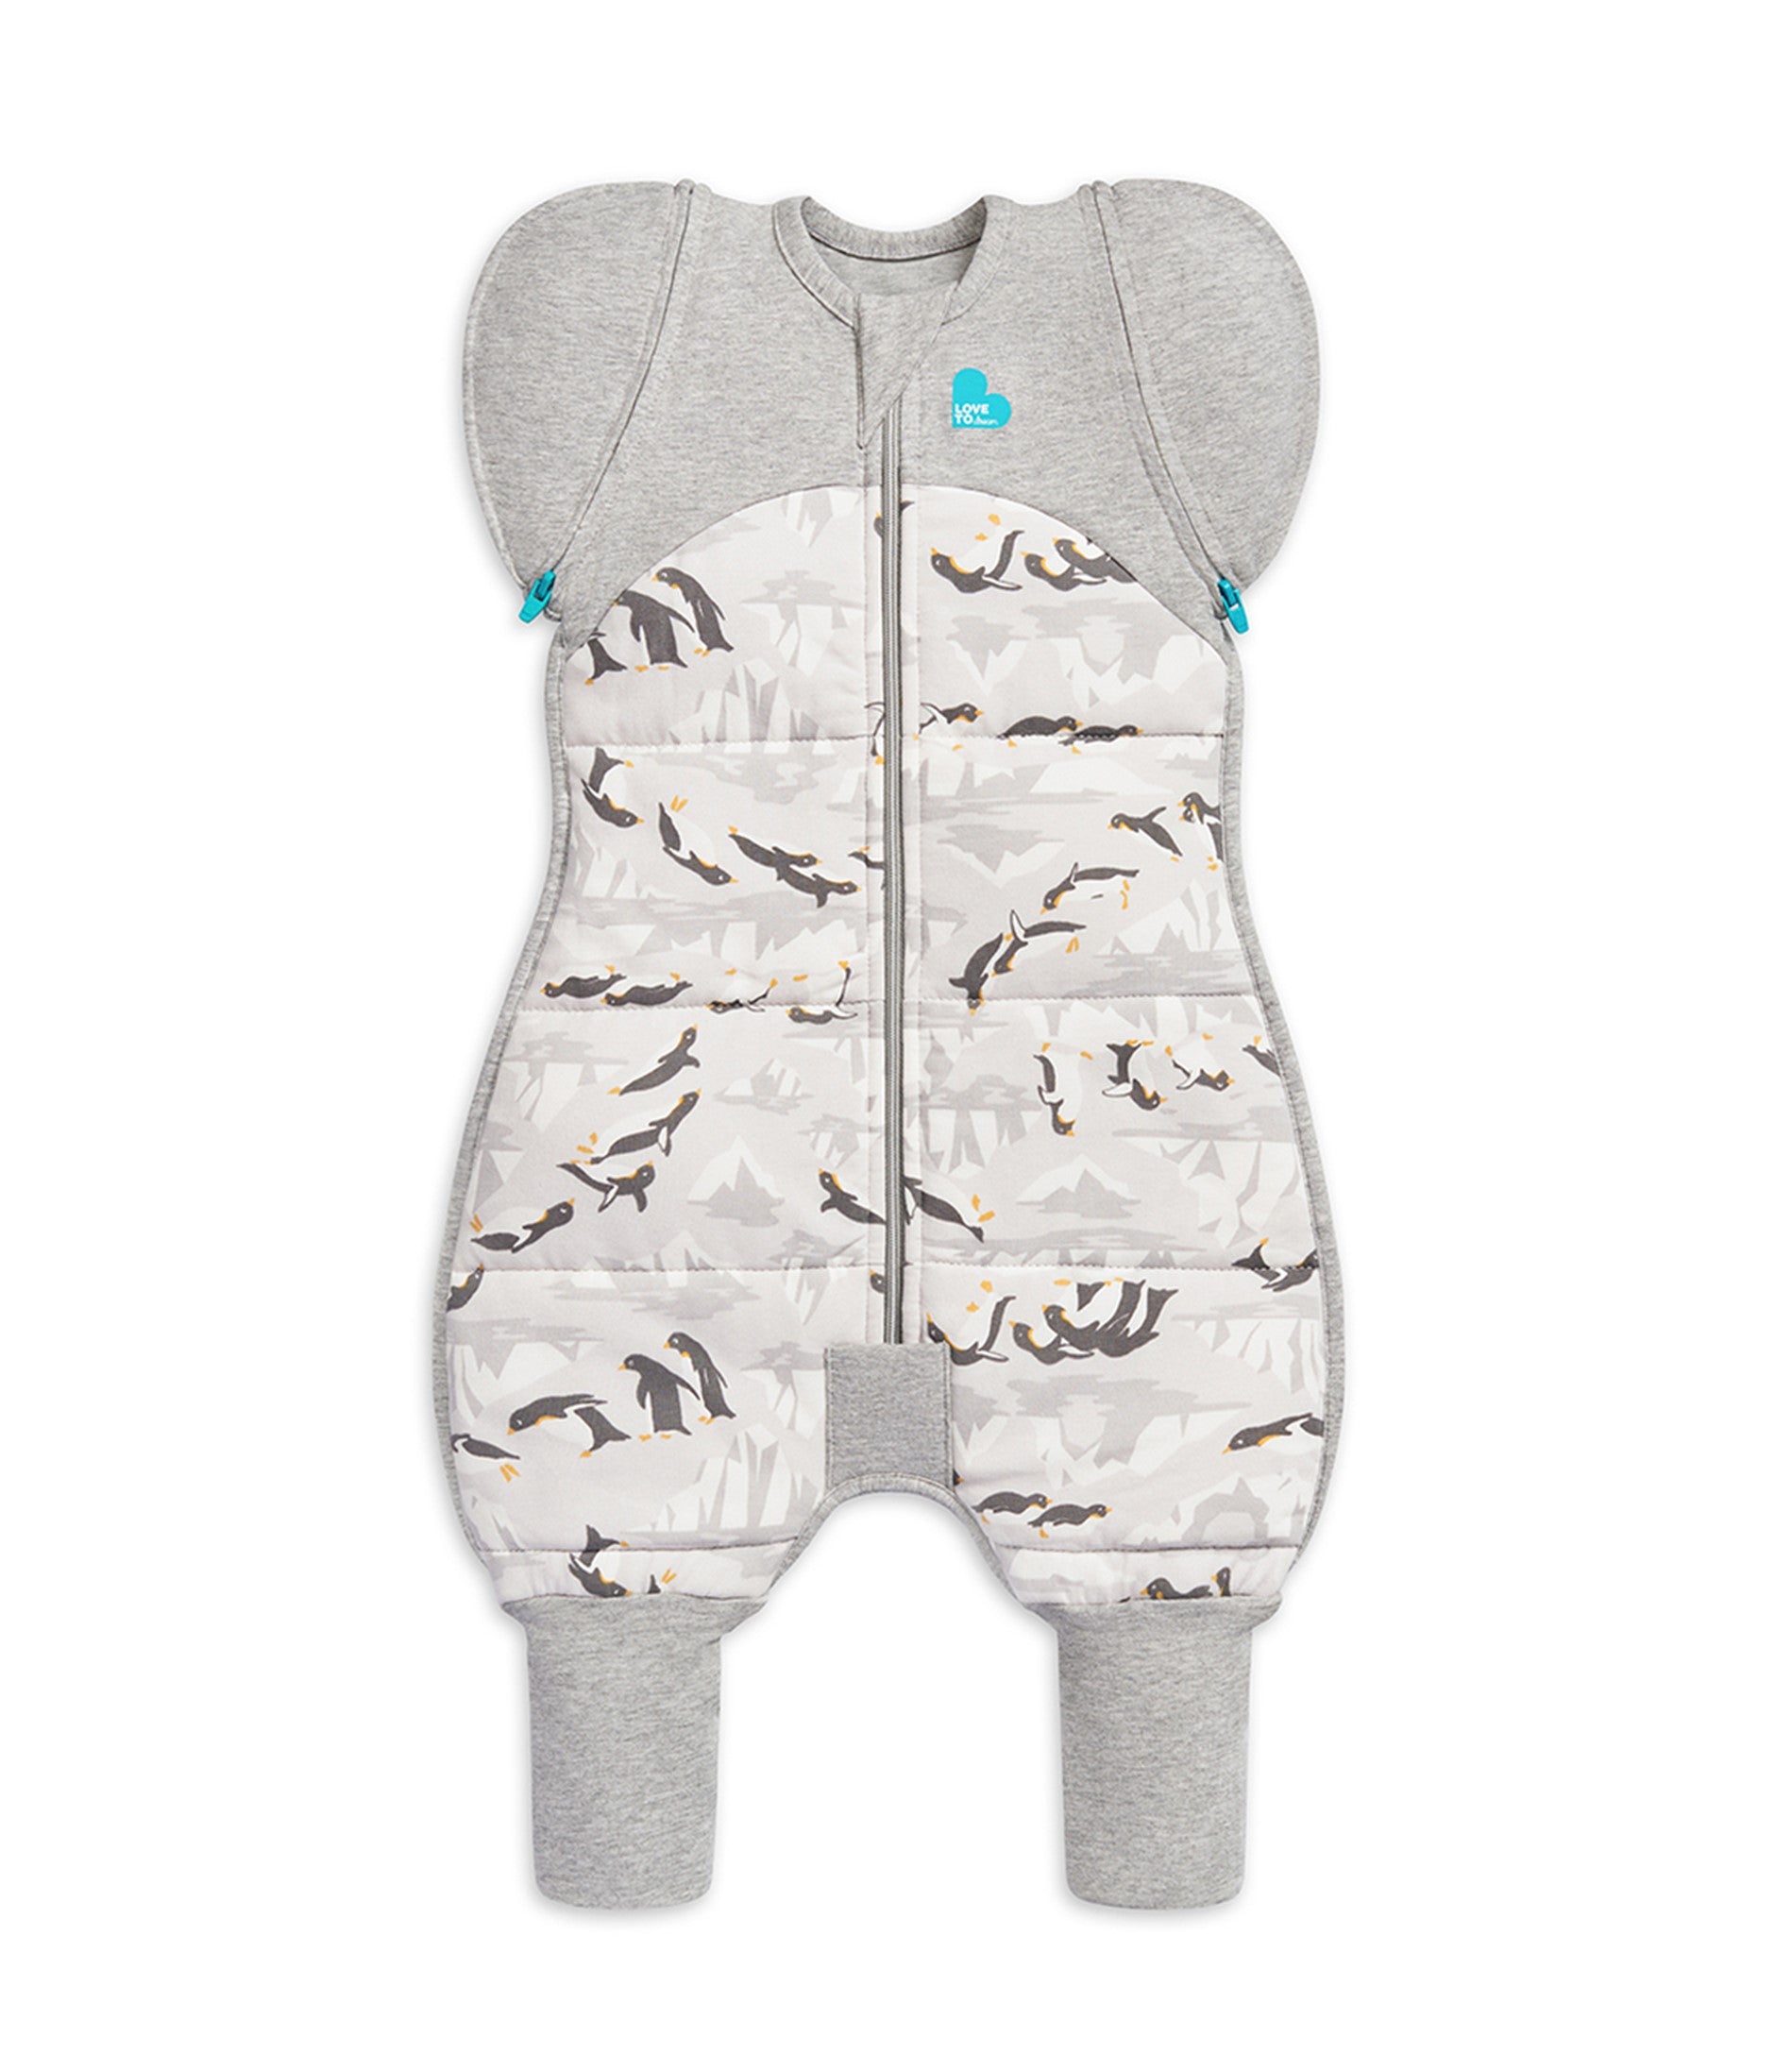 Buy Organic Bamboo Swaddle For Infants | Kids Sleep Suit Online on Brown  Living | Baby Swaddle